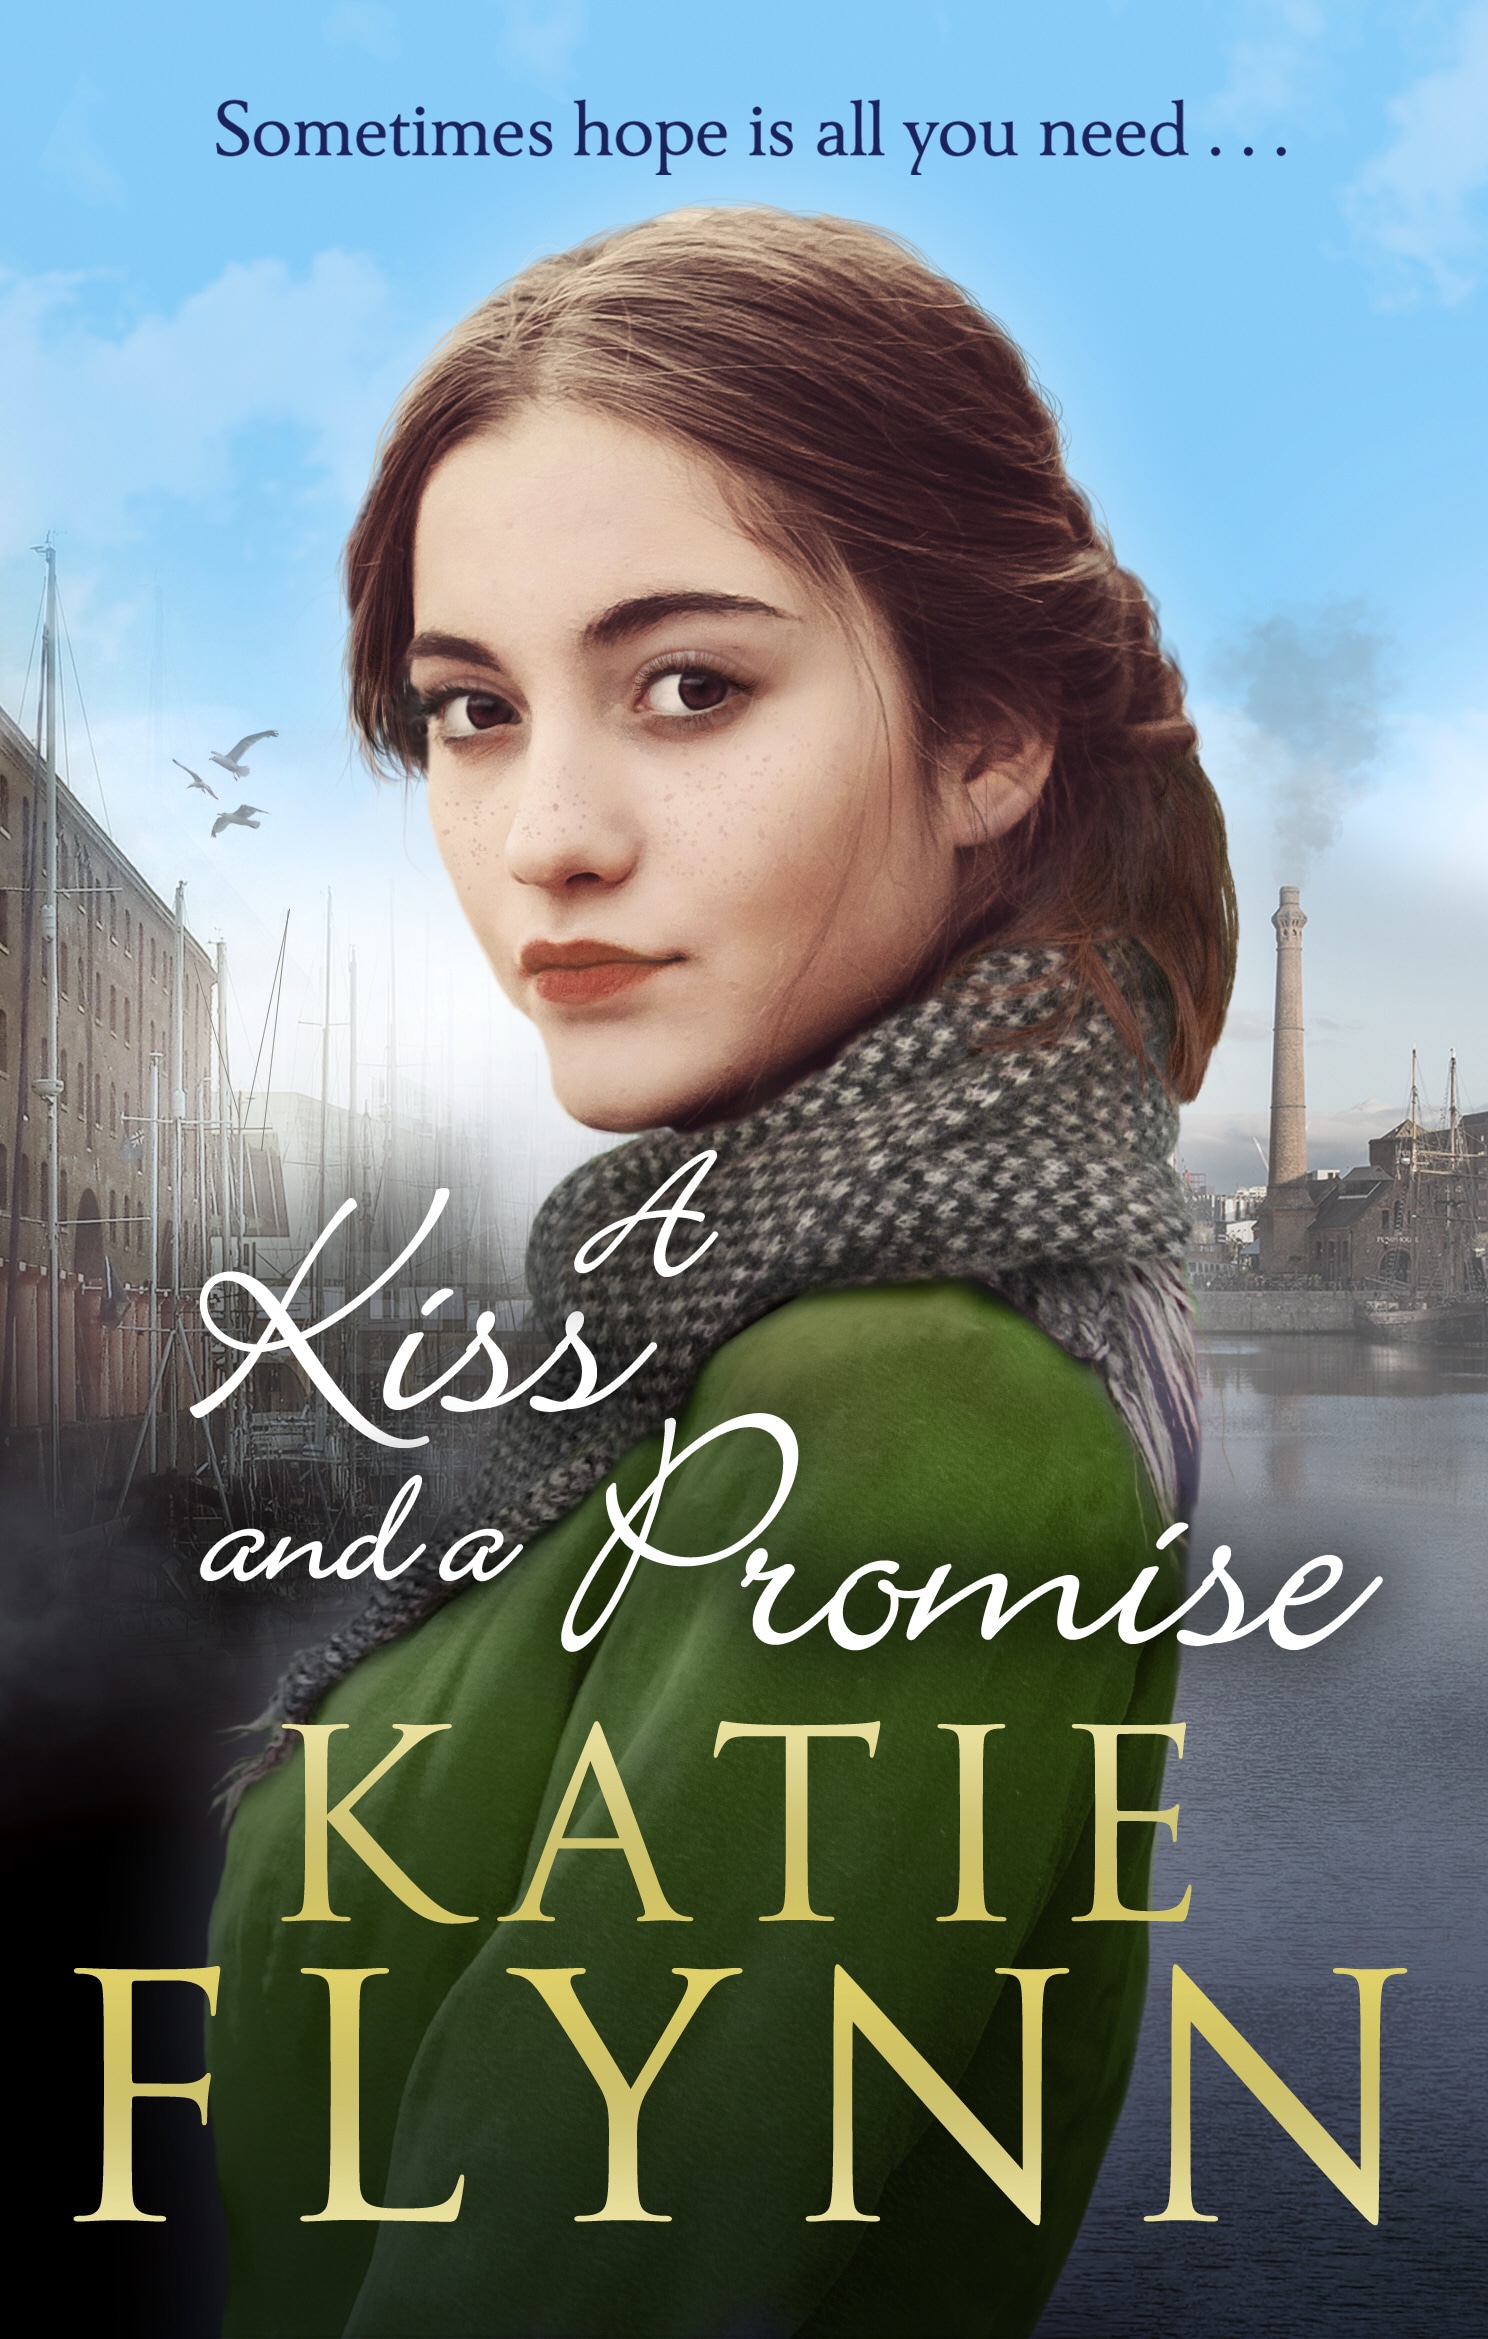 Book “A Kiss And A Promise” by Katie Flynn — July 25, 2019